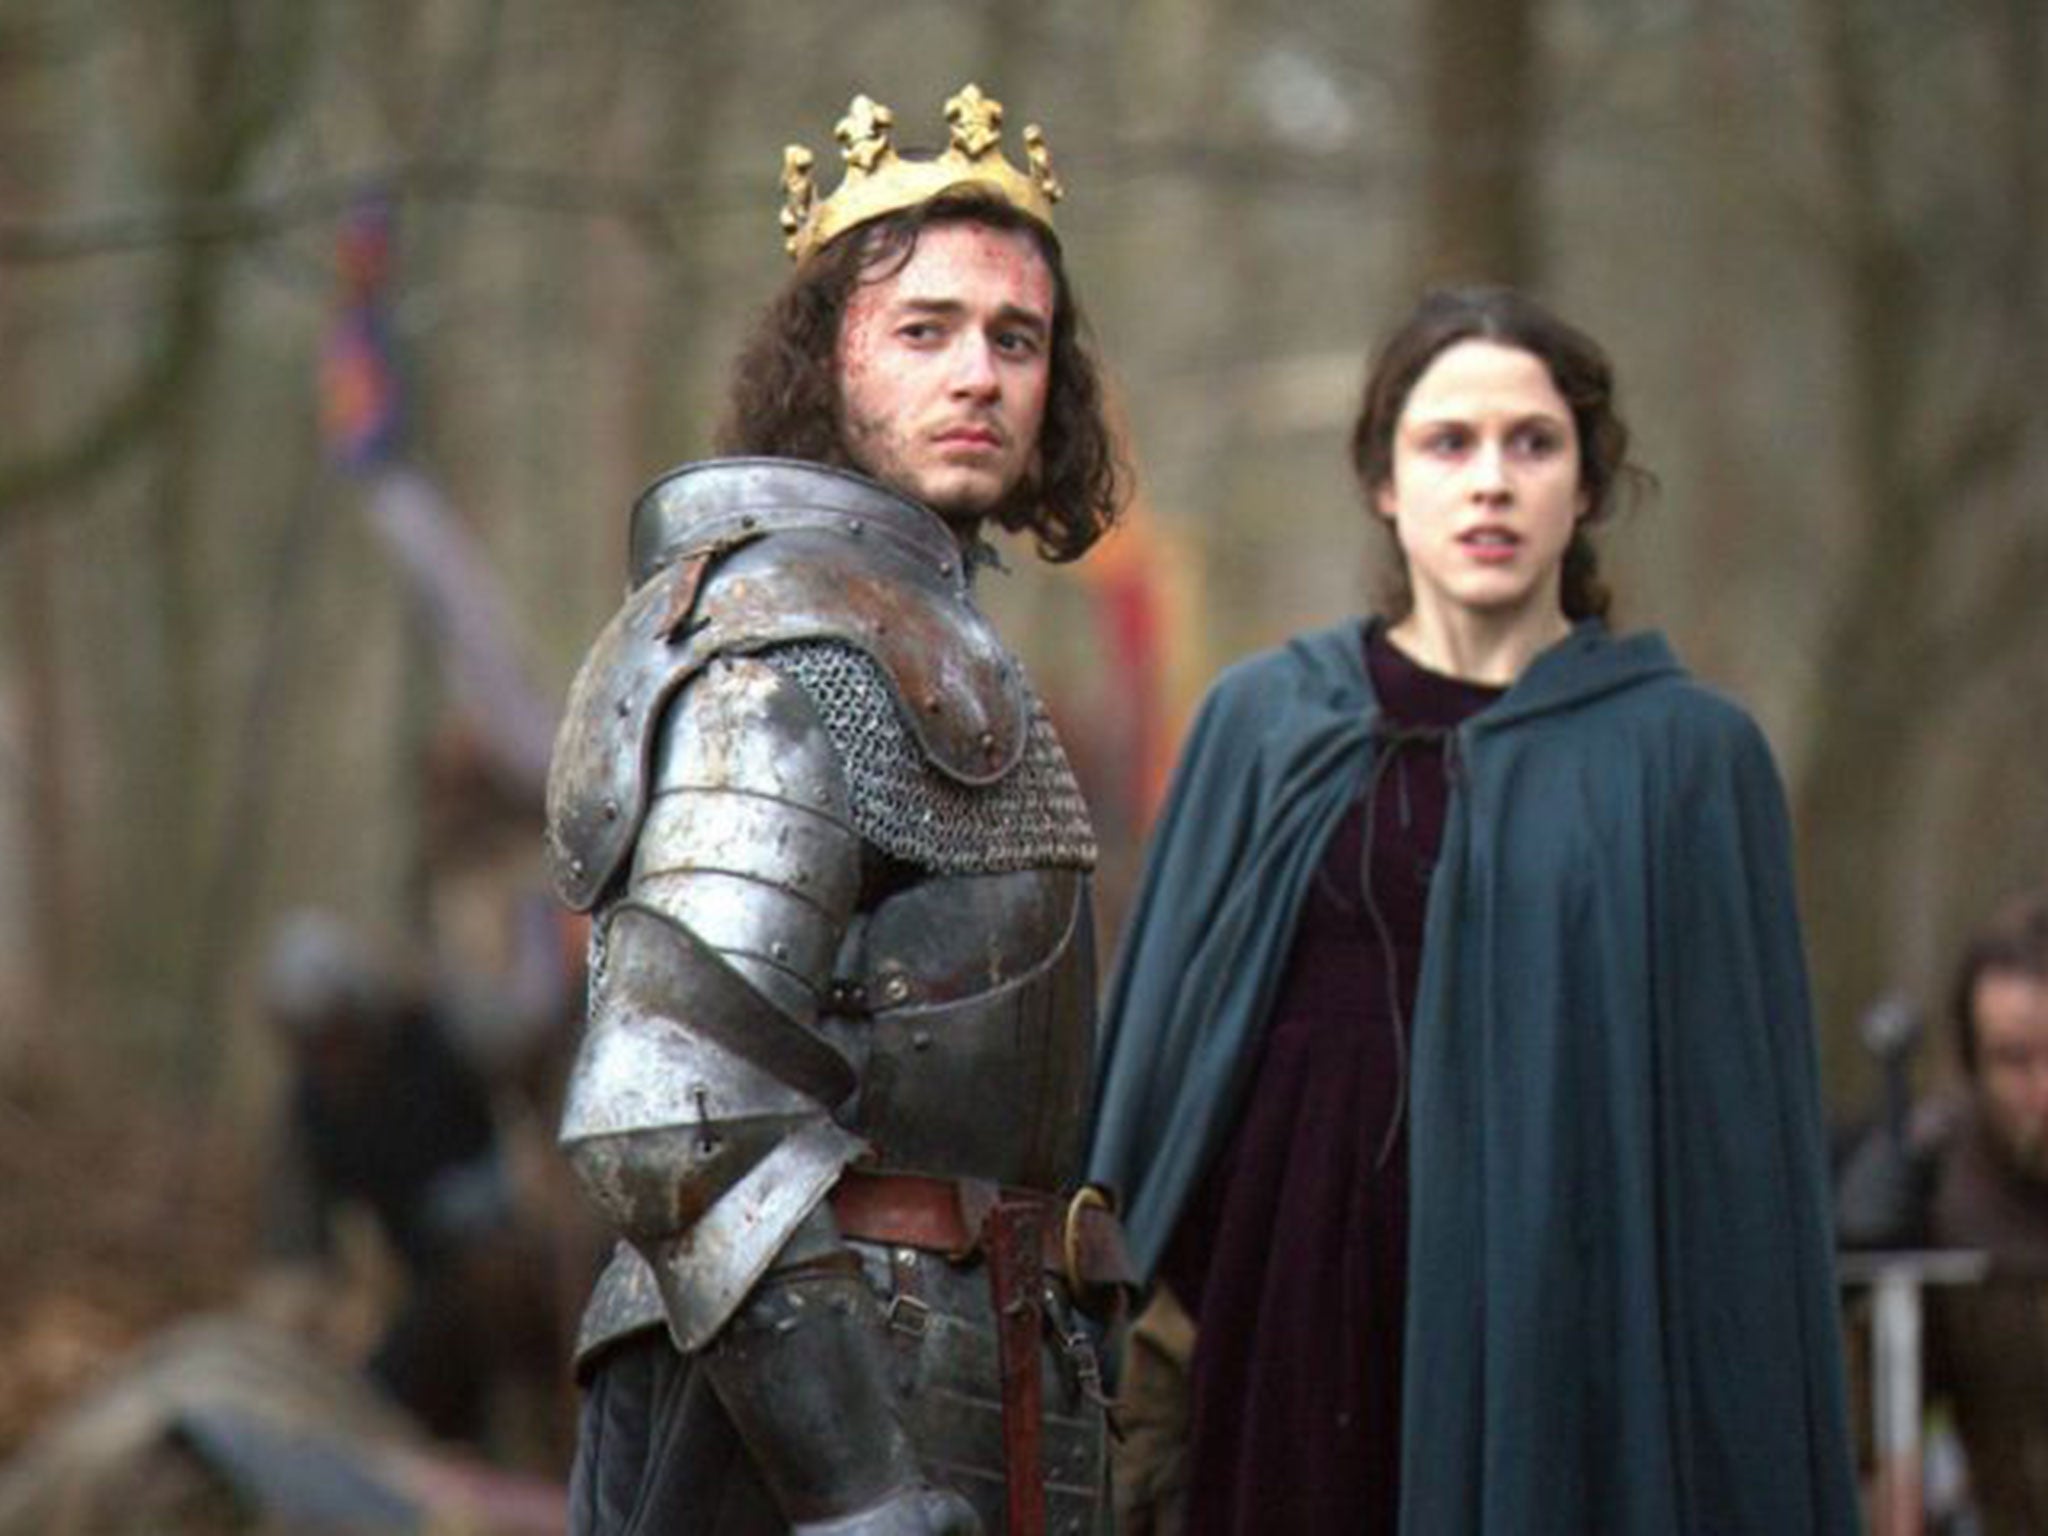 Mother courage: Margaret Beaufort as portrayed in the BBC’s The White Queen